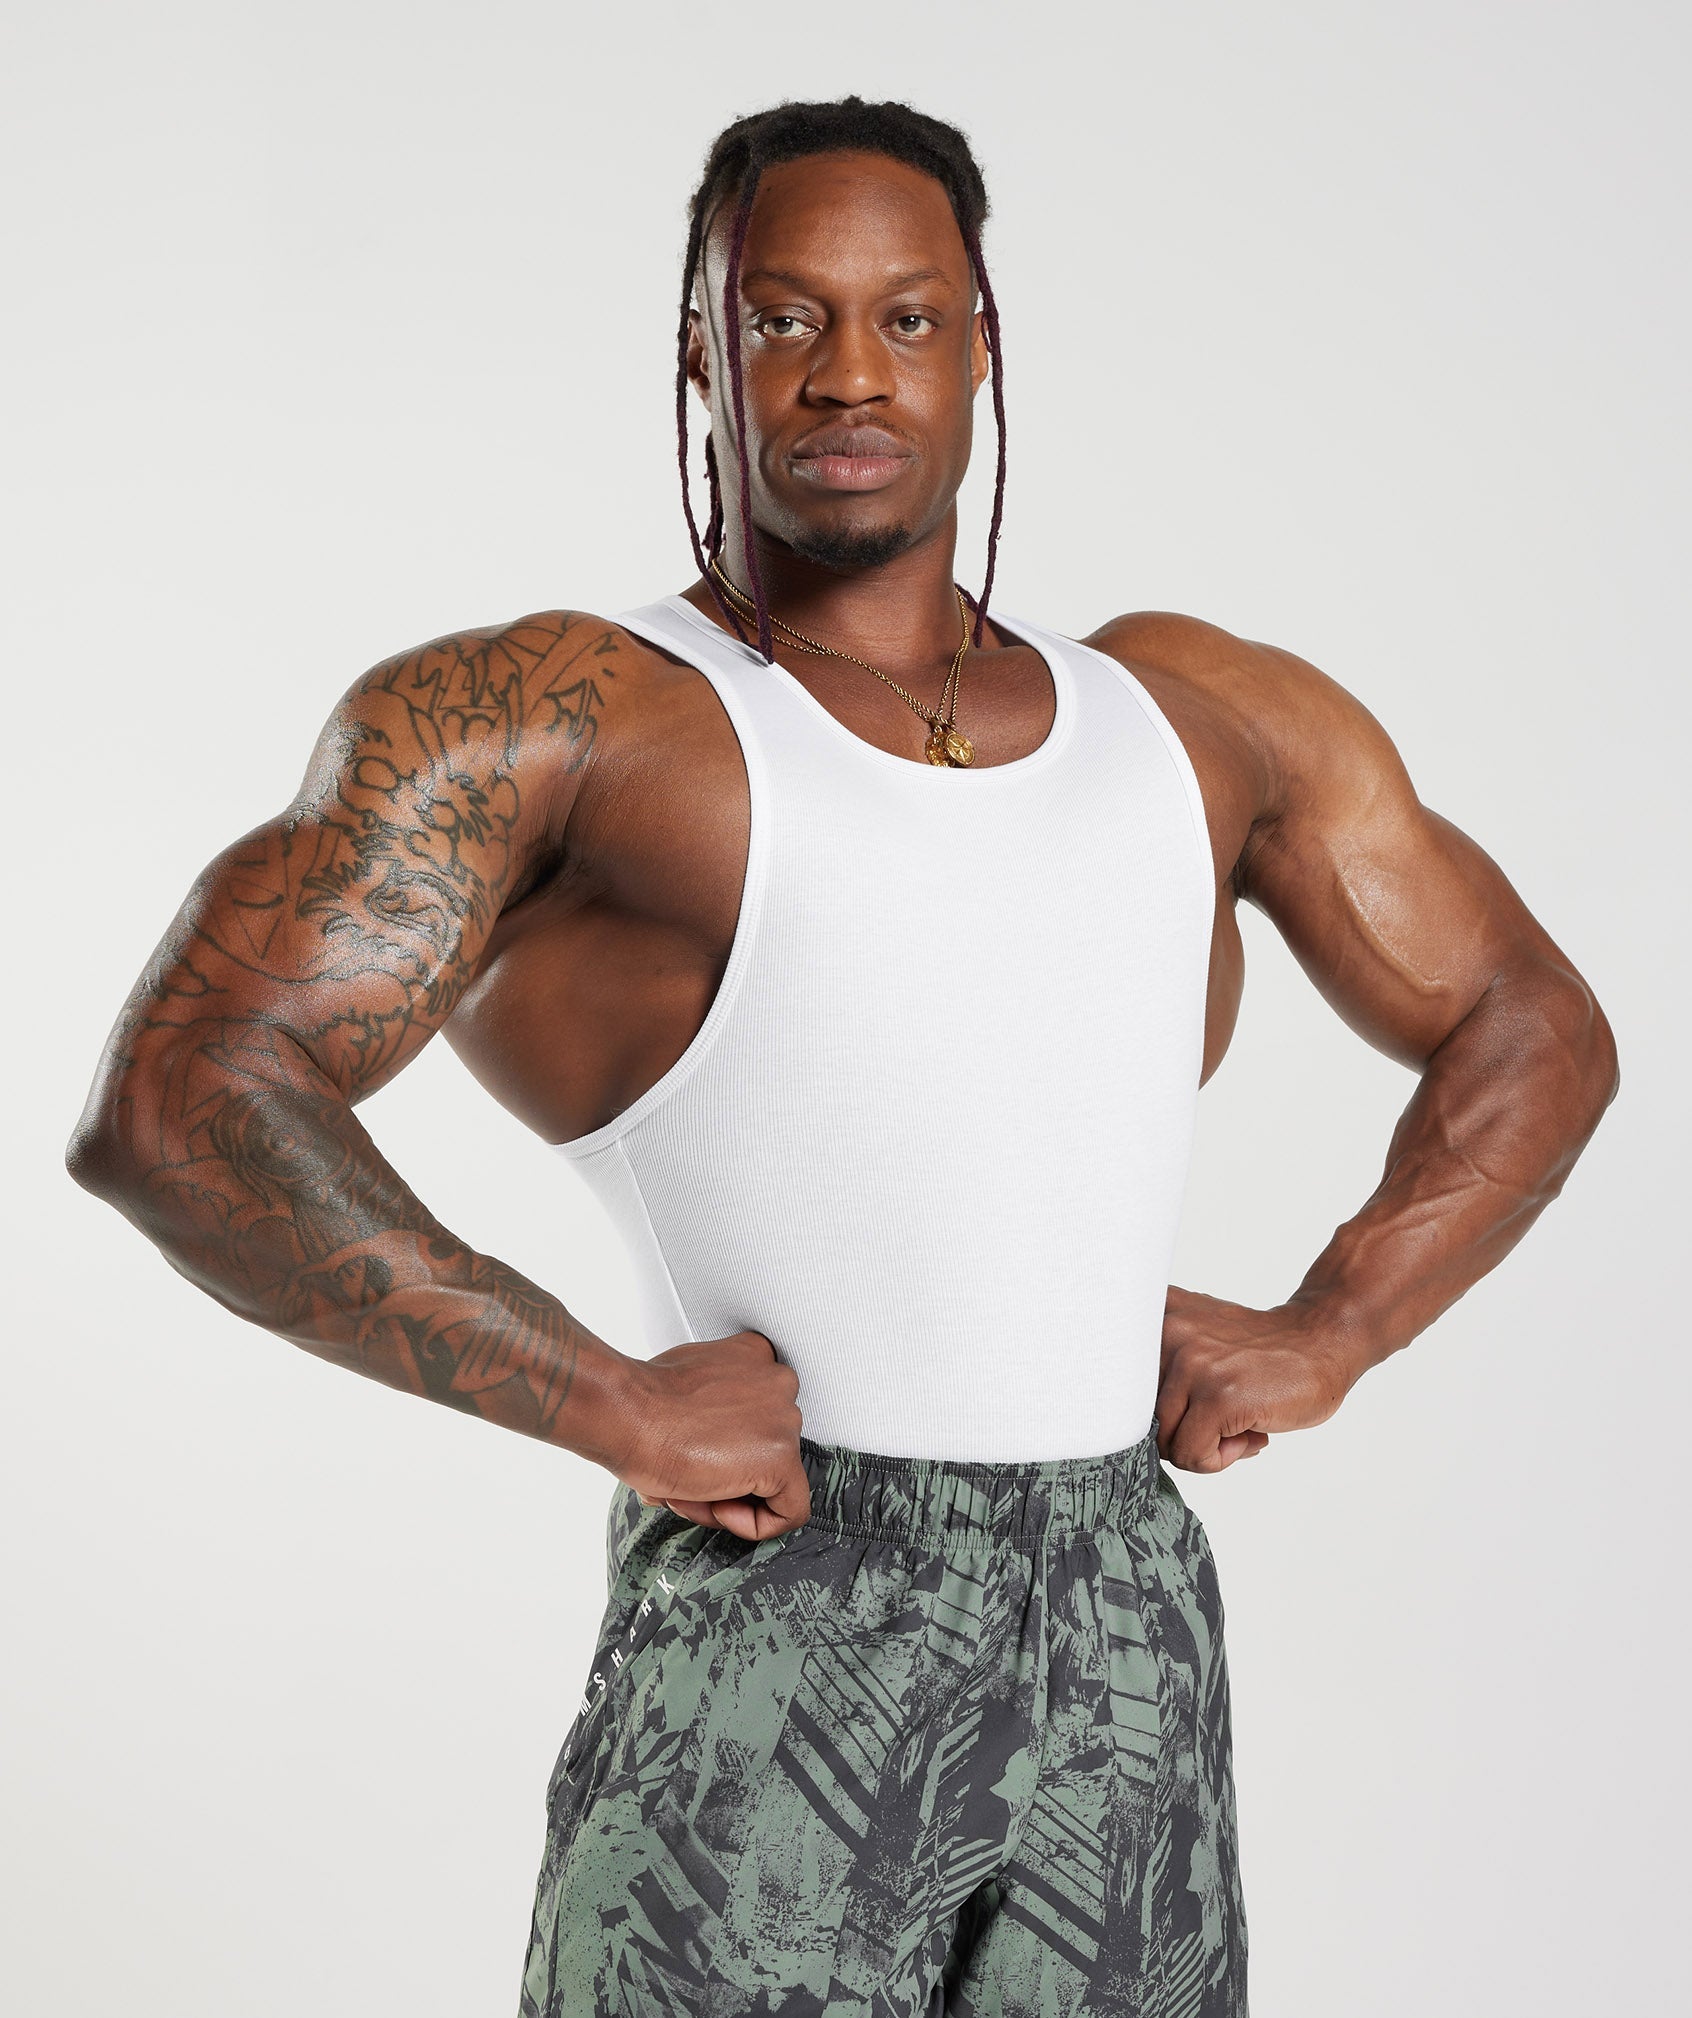 Men's Workout Tanks – Gym Tank tops from Gymshark